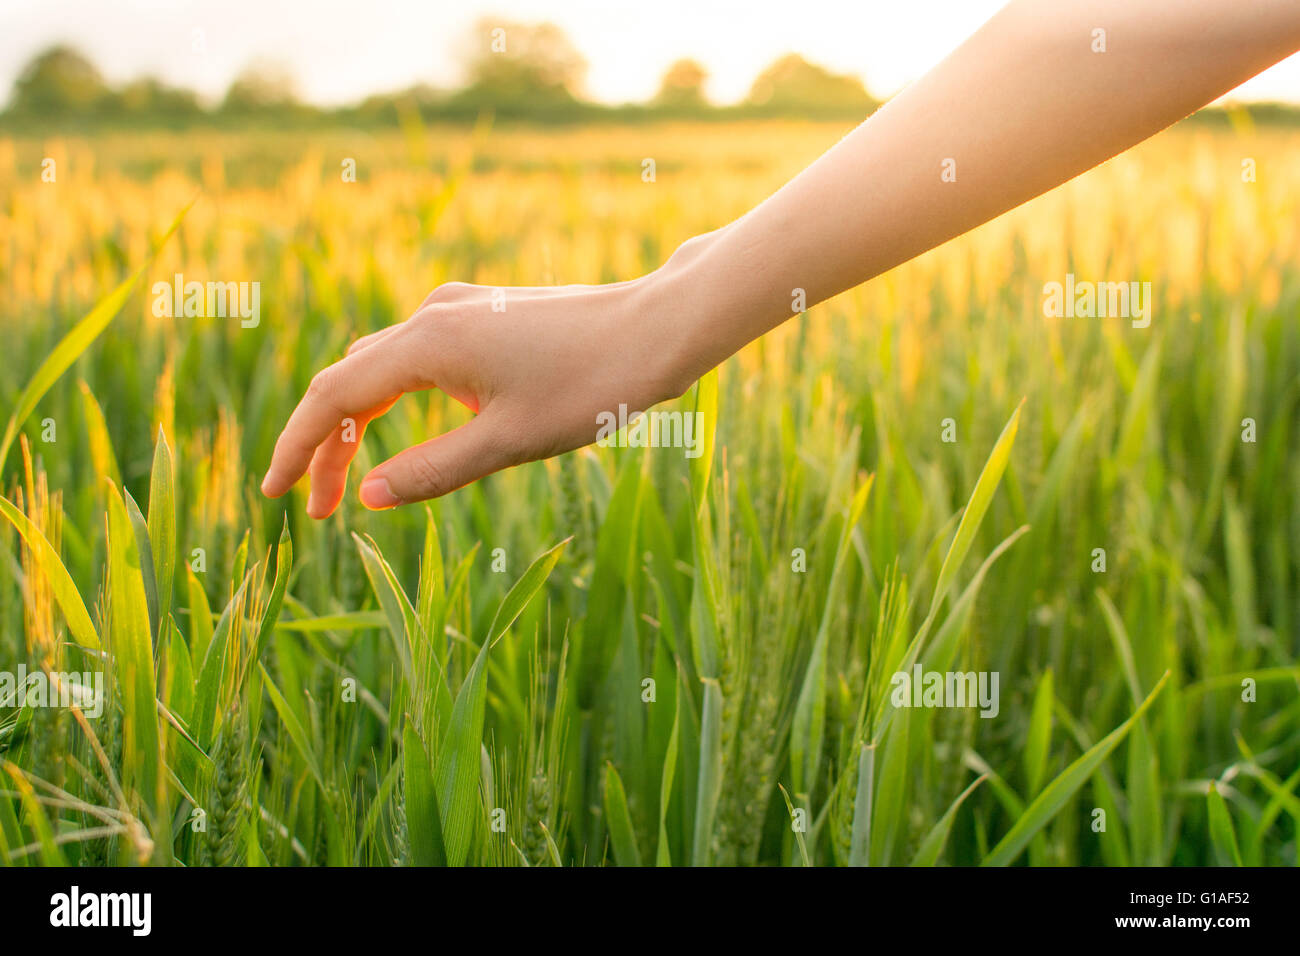 Woman hand in a field of wheat Stock Photo